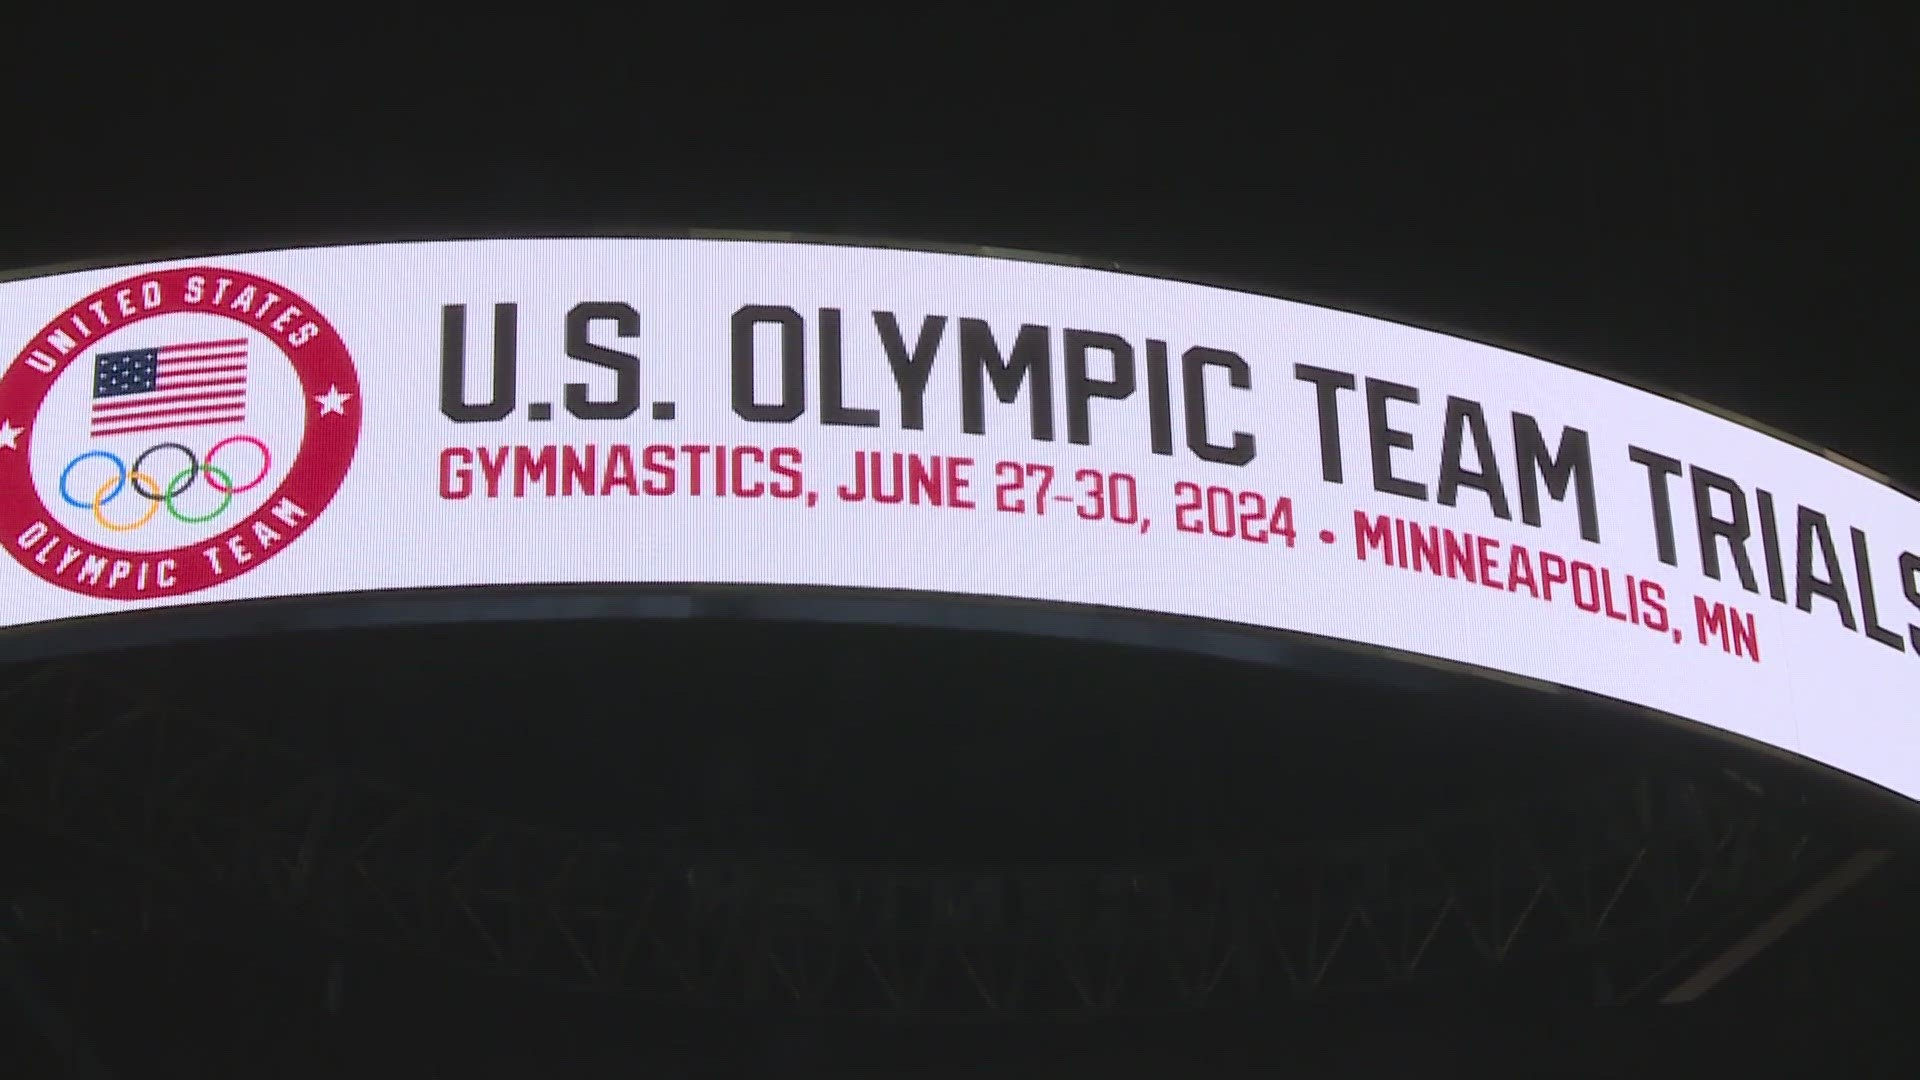 A record-breaking crowd was held at The Dome in 2021. But the U.S. Olympic Gymnastics Team Trials are headed to the Twin Cities in 2024.